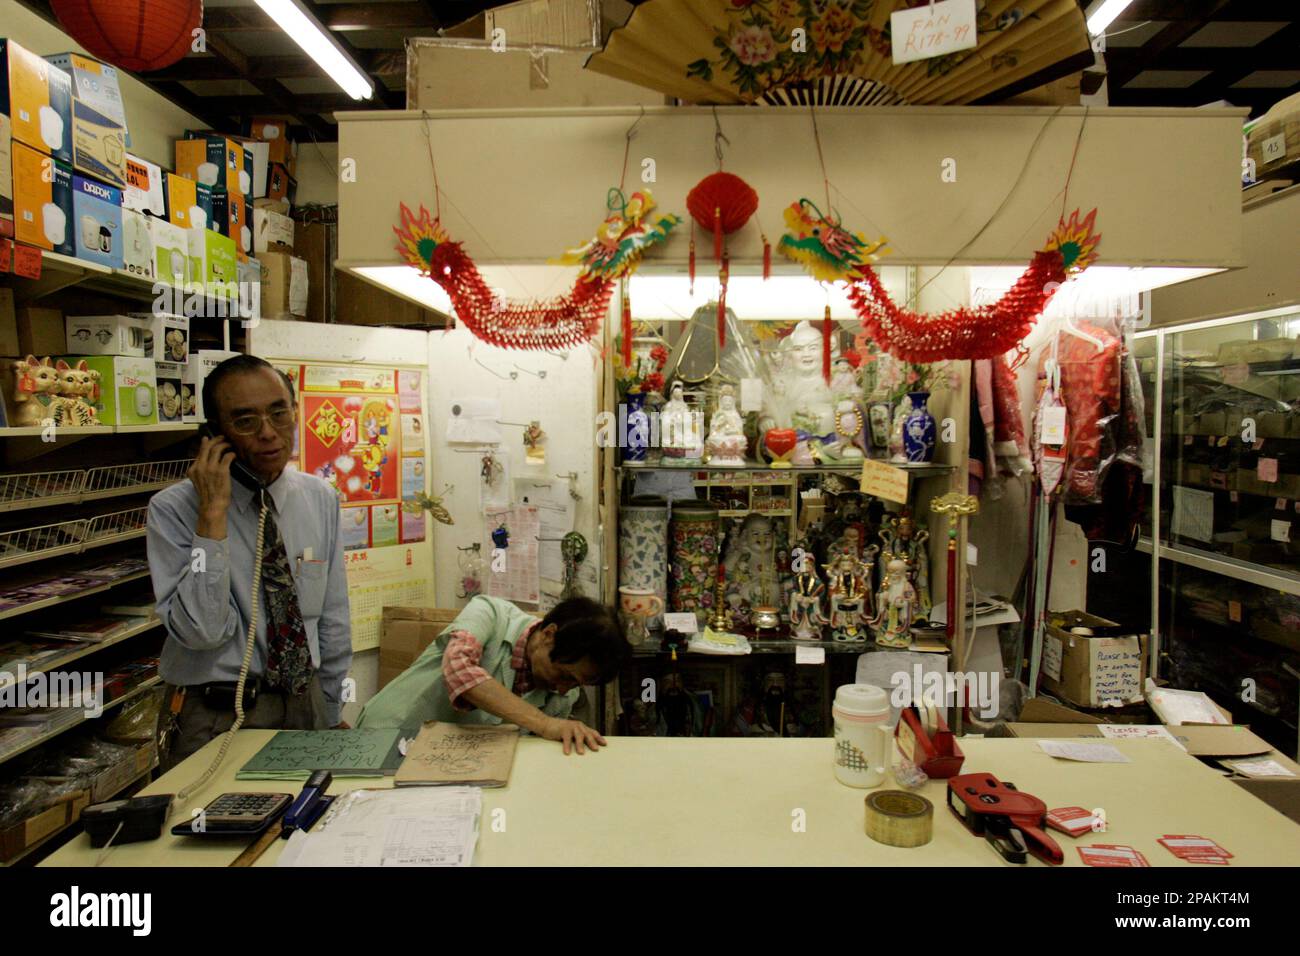 Walter Pon, talks on the phone inside his Sui Hing Hong supermarket in  Johannesburg, South Africa, Monday, Jan. 7, 2008. Standing defiantly among  the fading remnants of Johannesburg's original Chinatown in Commissioner